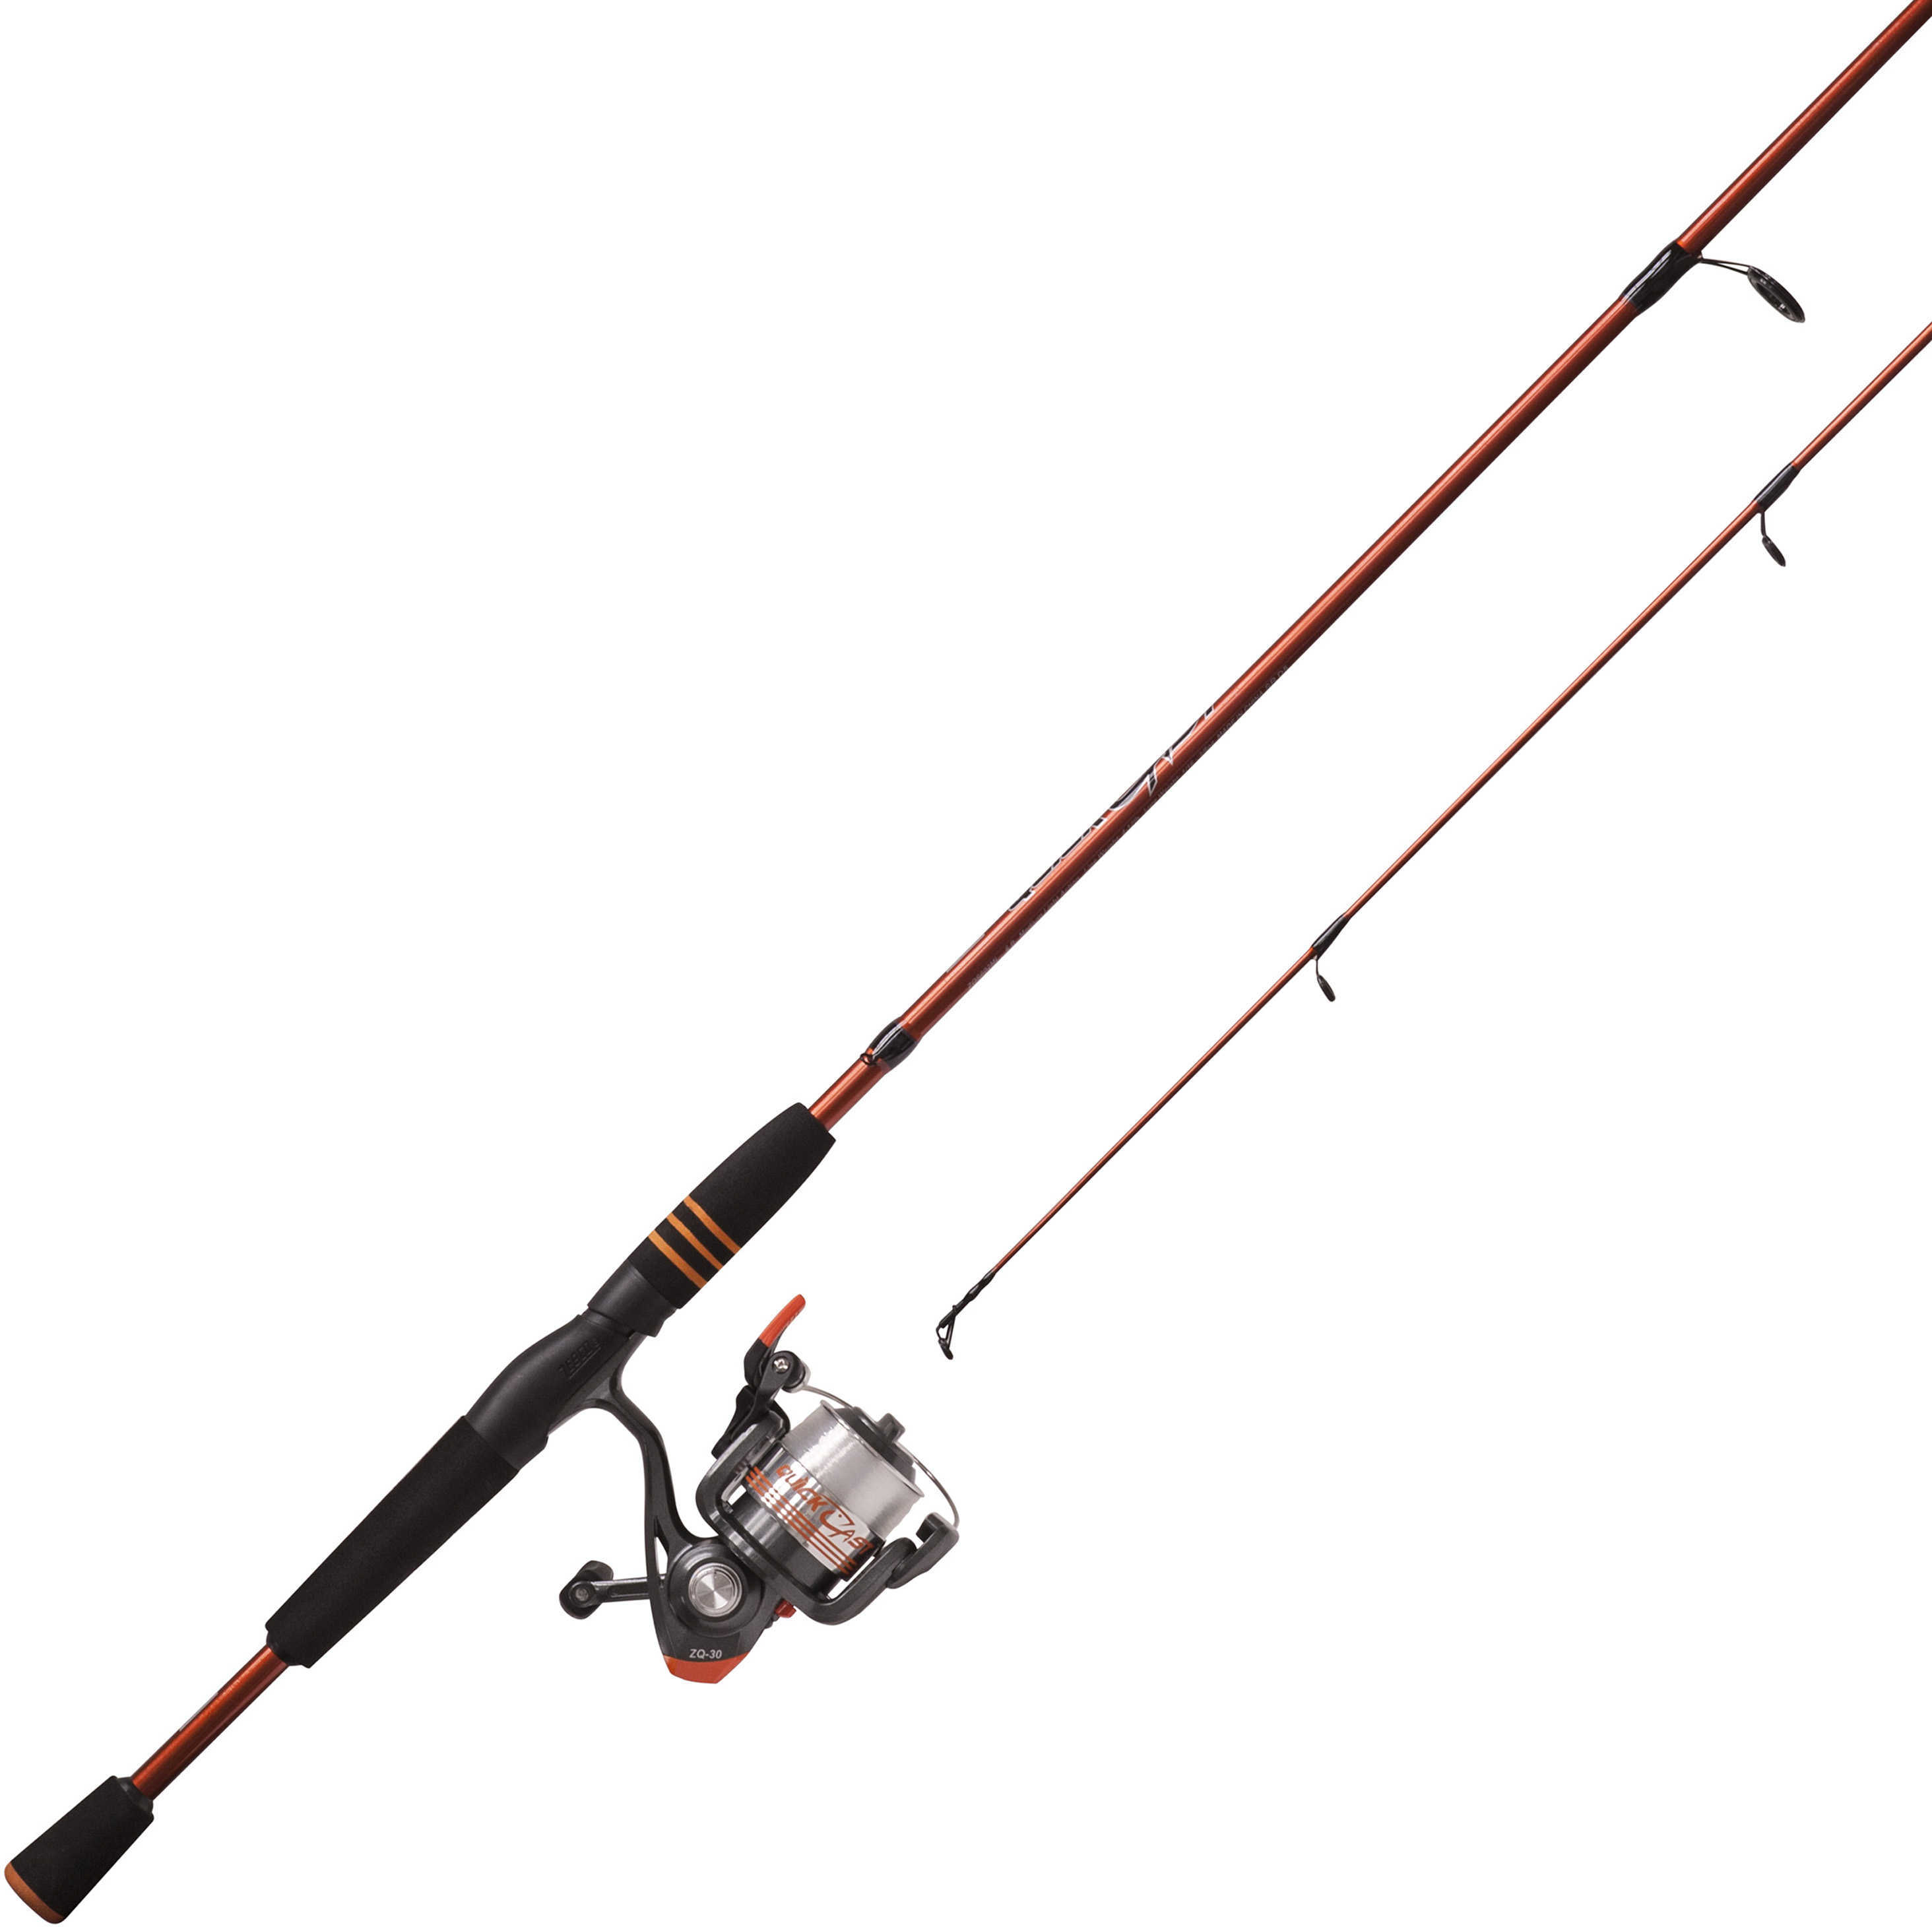 Zebco / Quantum Quickcast Spinning Combo 6'6" 2 Pieces, Medium Power Md: ZQ30662M,NS4